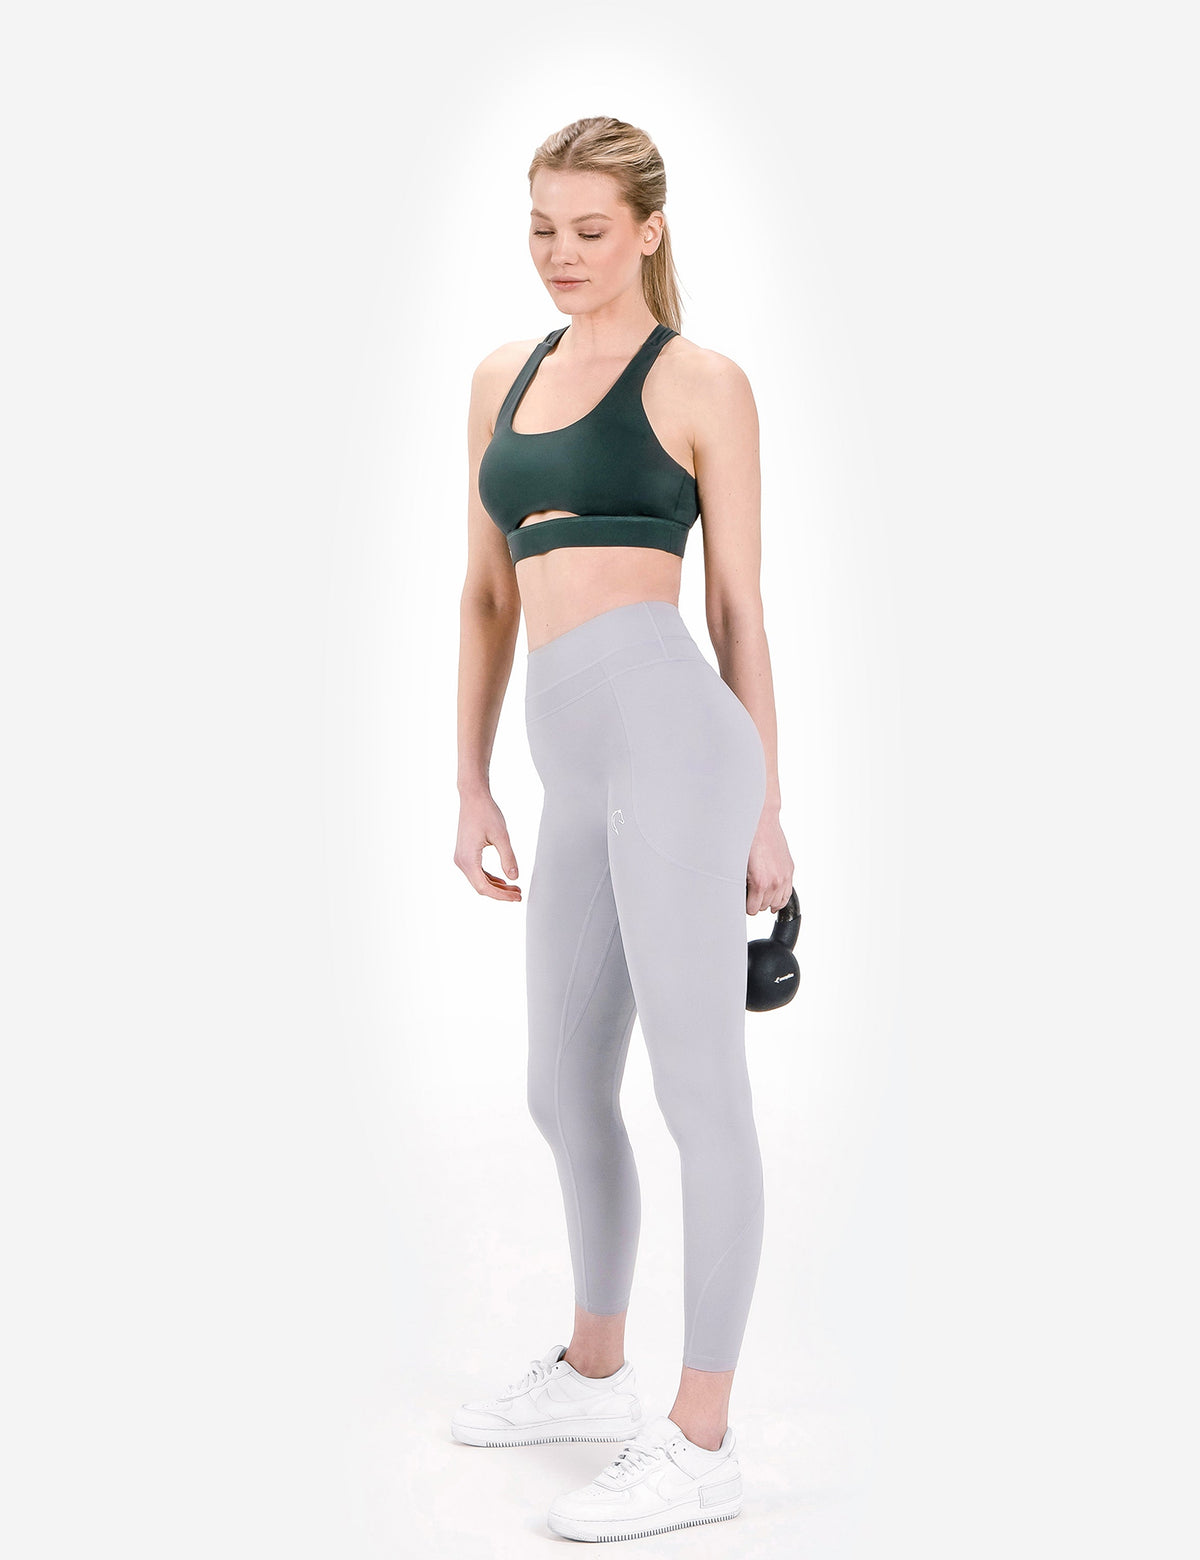 Tempo Glo High Waisted Workout Leggings - Mint / XL  High waisted leggings  workout, Workout, Workout leggings